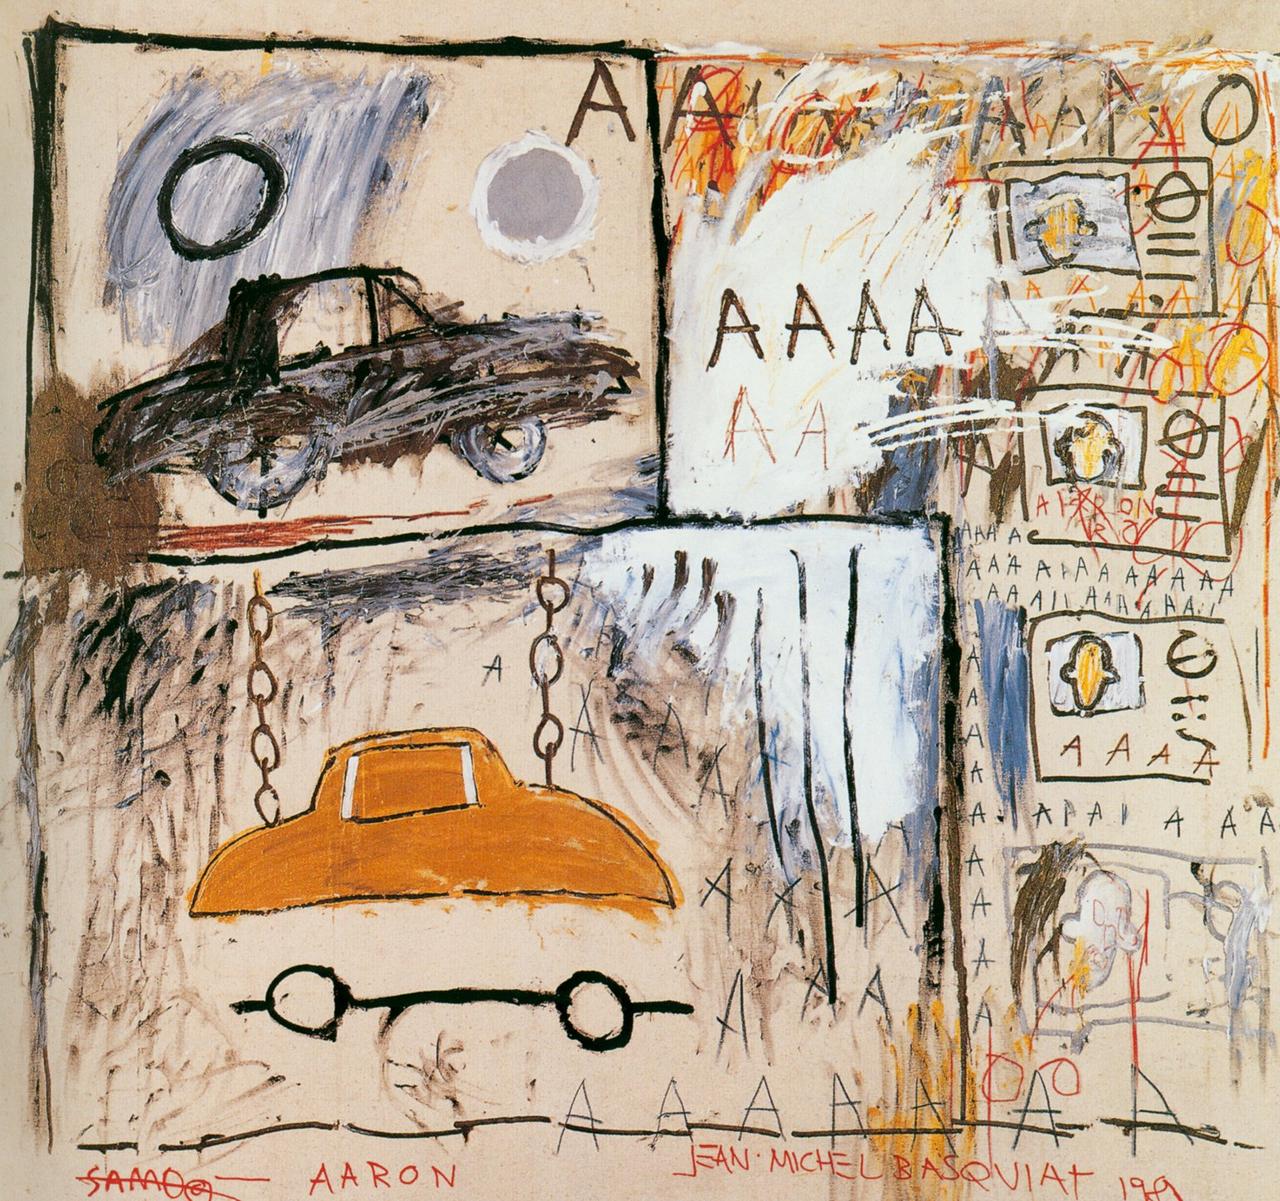 An abstract painting titled “Cadillac Moon” by Jean-Michel Basquiat, featuring multiple disjointed images including a fleet of TV screens displaying varied faces on the right and an abstractly drawn Cadillac on the top left of the canvas. The painting also features Basquiat's trademark SAMO© tag crossed out, as well as a vague reference to baseball icon Hank Aaron. The color scheme is primarily bright, with bold strokes and disorganized patterns, reflecting the chaotic nature of a TV broadcast and the artist's early experimentation with style.